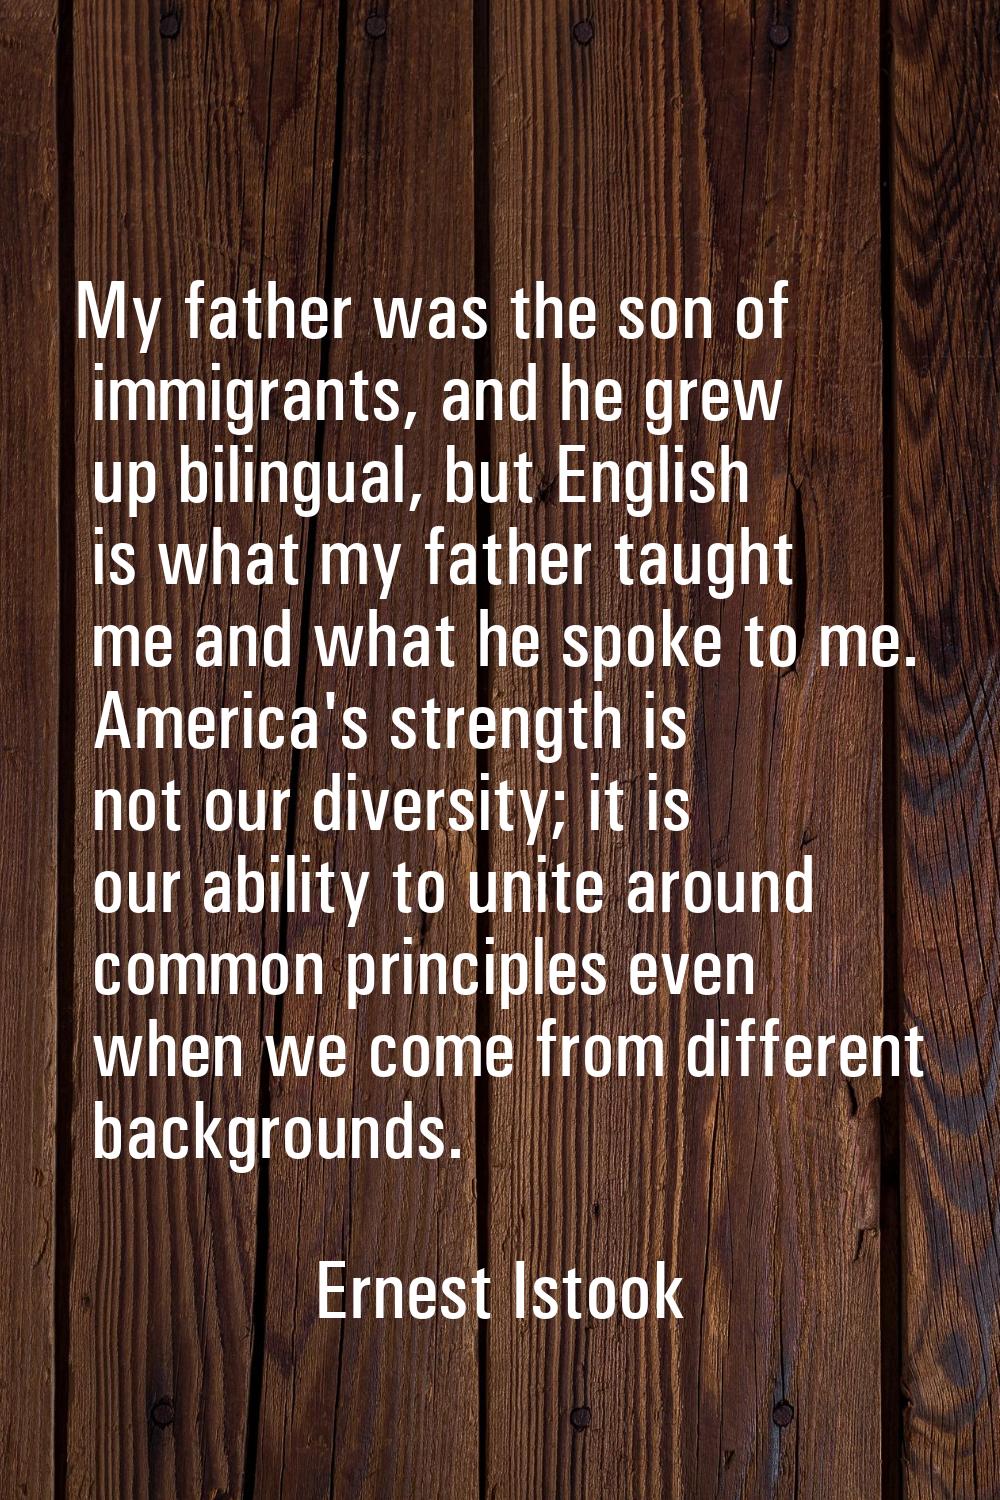 My father was the son of immigrants, and he grew up bilingual, but English is what my father taught